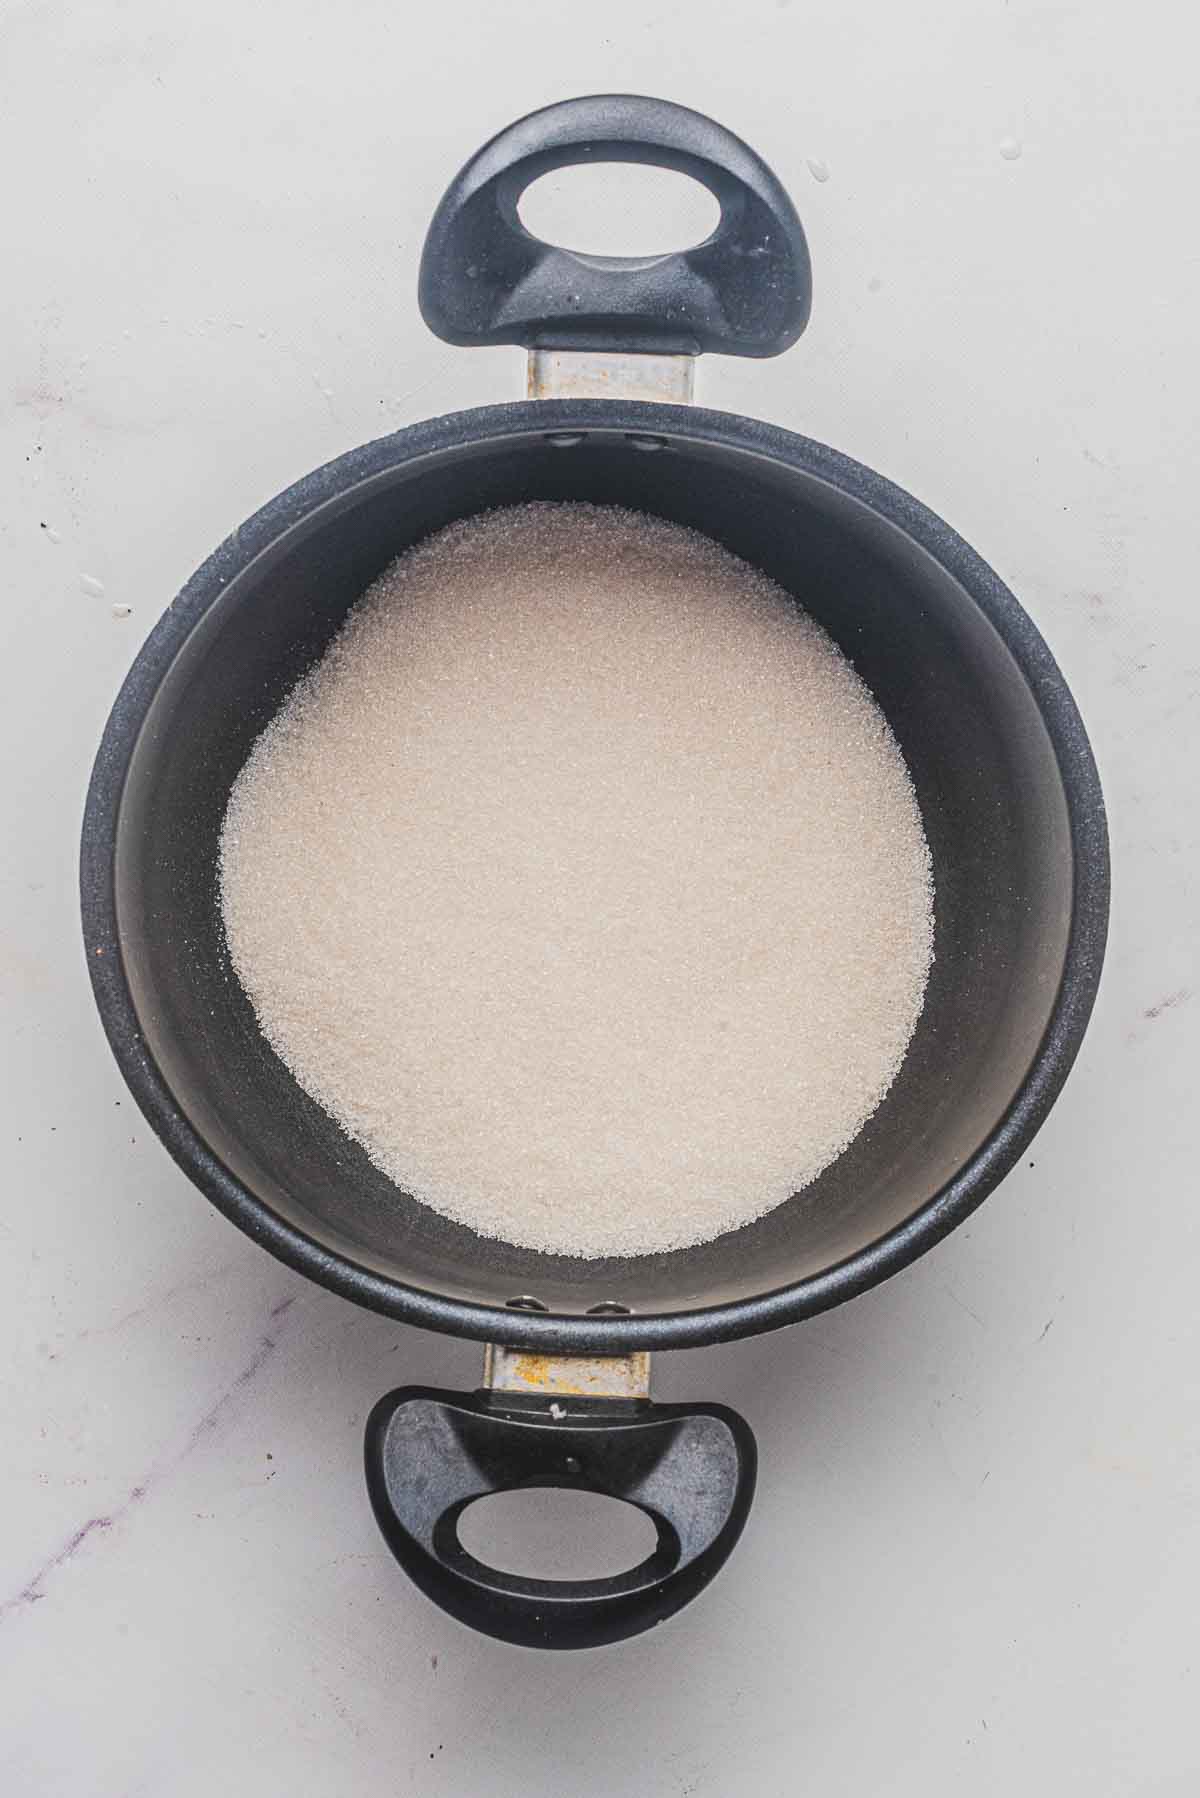 A saucepan filled with white granulated sugar.